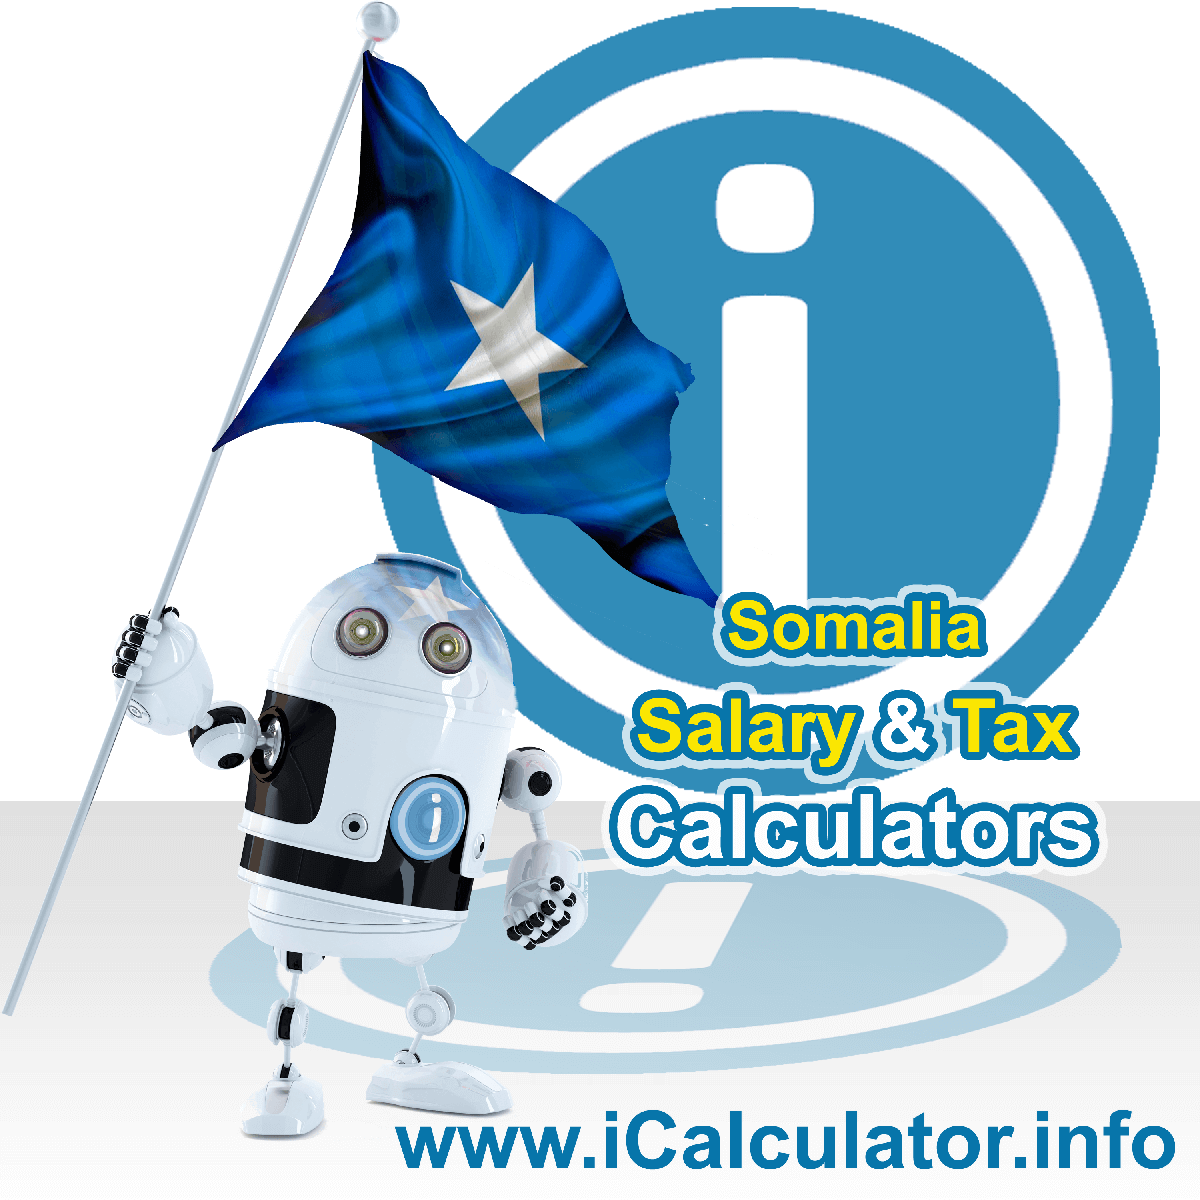 Somalia Wage Calculator. This image shows the Somalia flag and information relating to the tax formula for the Somalia Tax Calculator